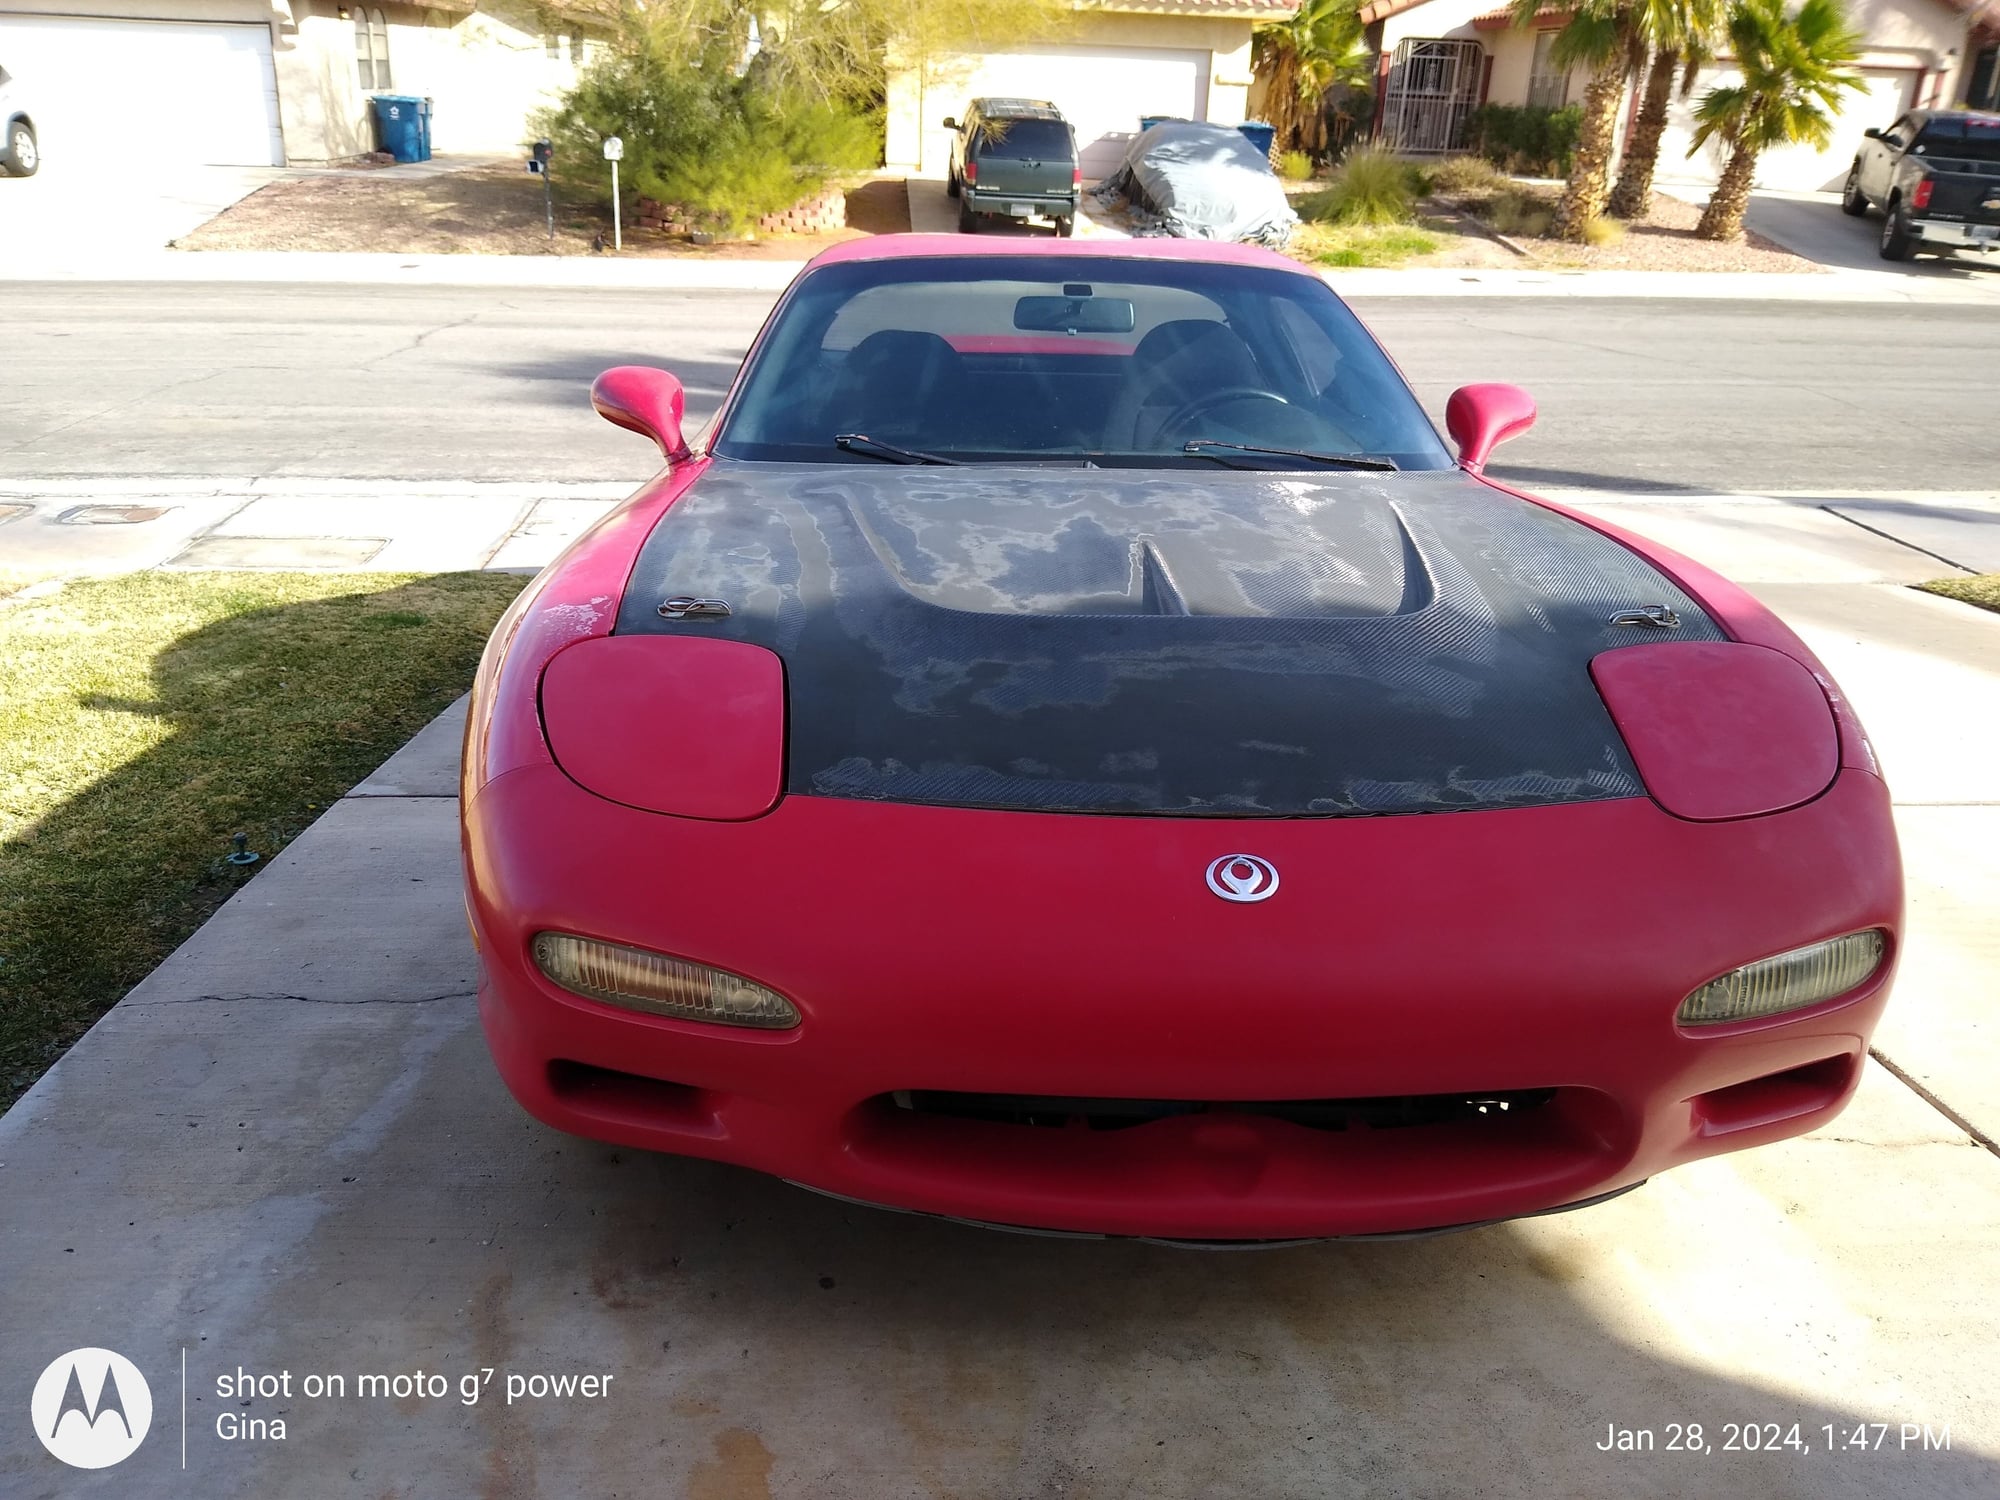 1994 Mazda RX-7 - 1994 Red Mazda Rx7 FD R2 Clean Title (not running) - Used - VIN JM1FD3339R0301398 - 174,028 Miles - Other - Manual - Coupe - Red - Las Vegas, NV 89145, United States